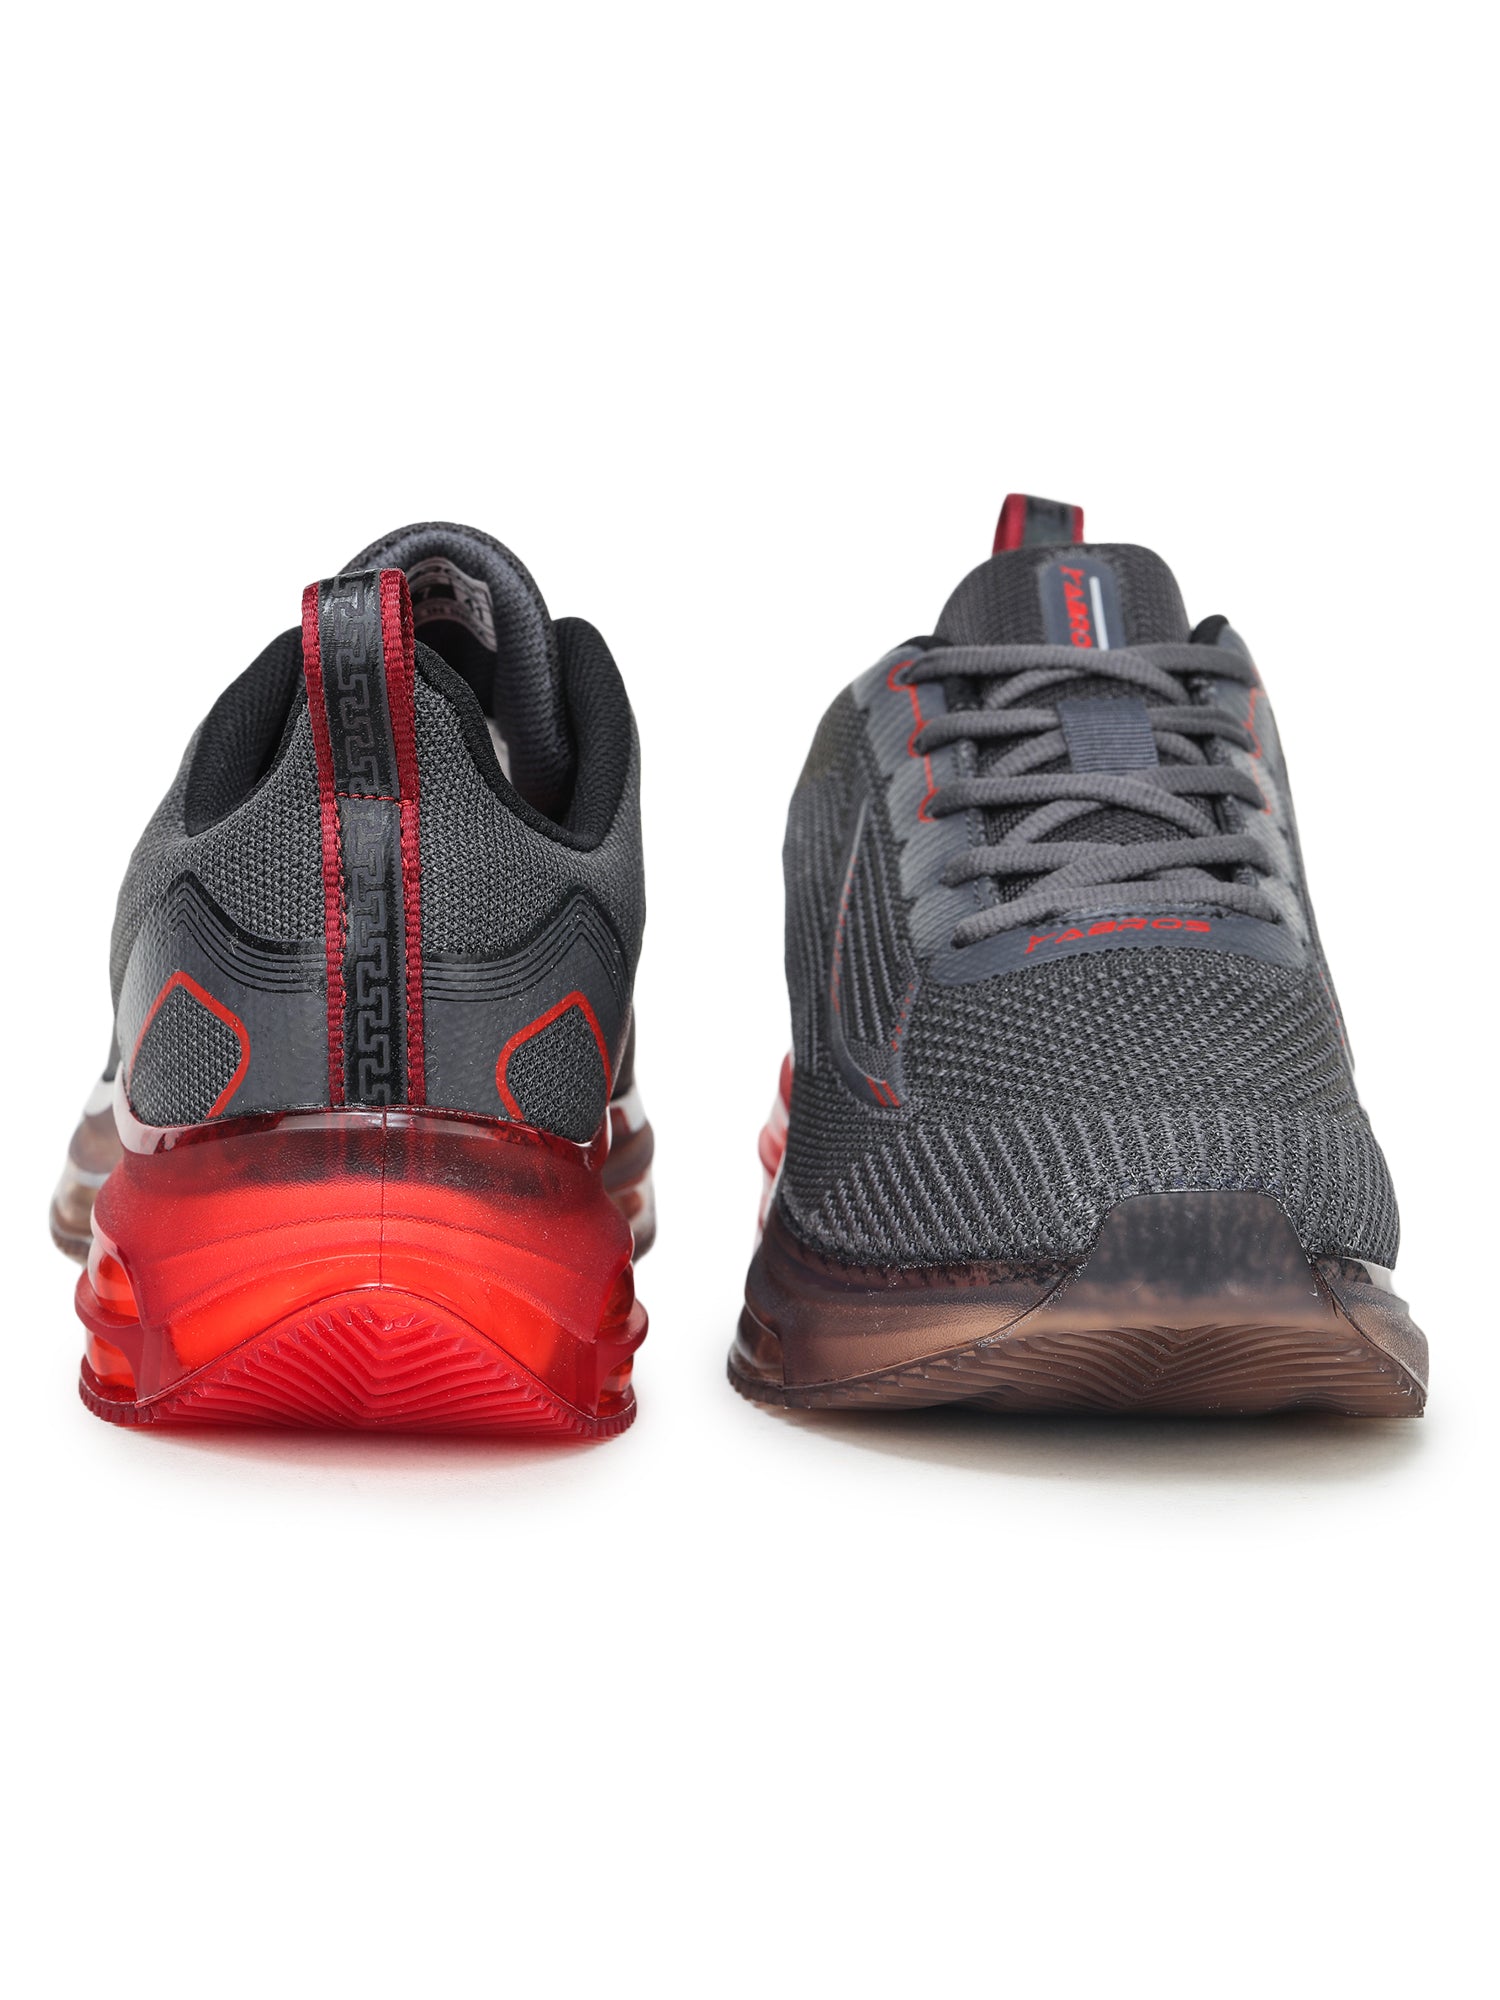 Courage Sports Shoes For Men